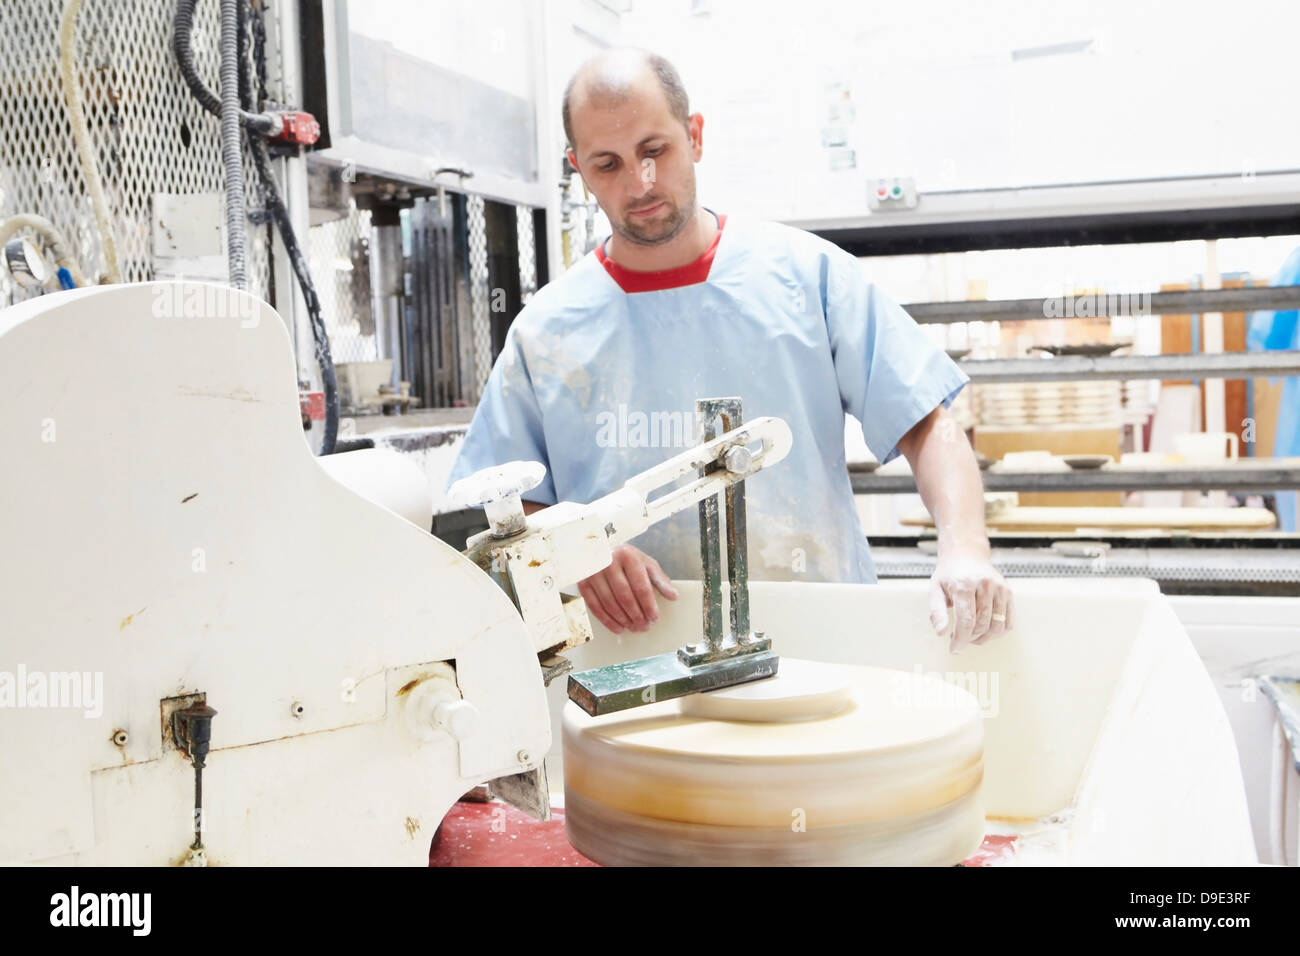 Man working in pottery factory Stock Photo